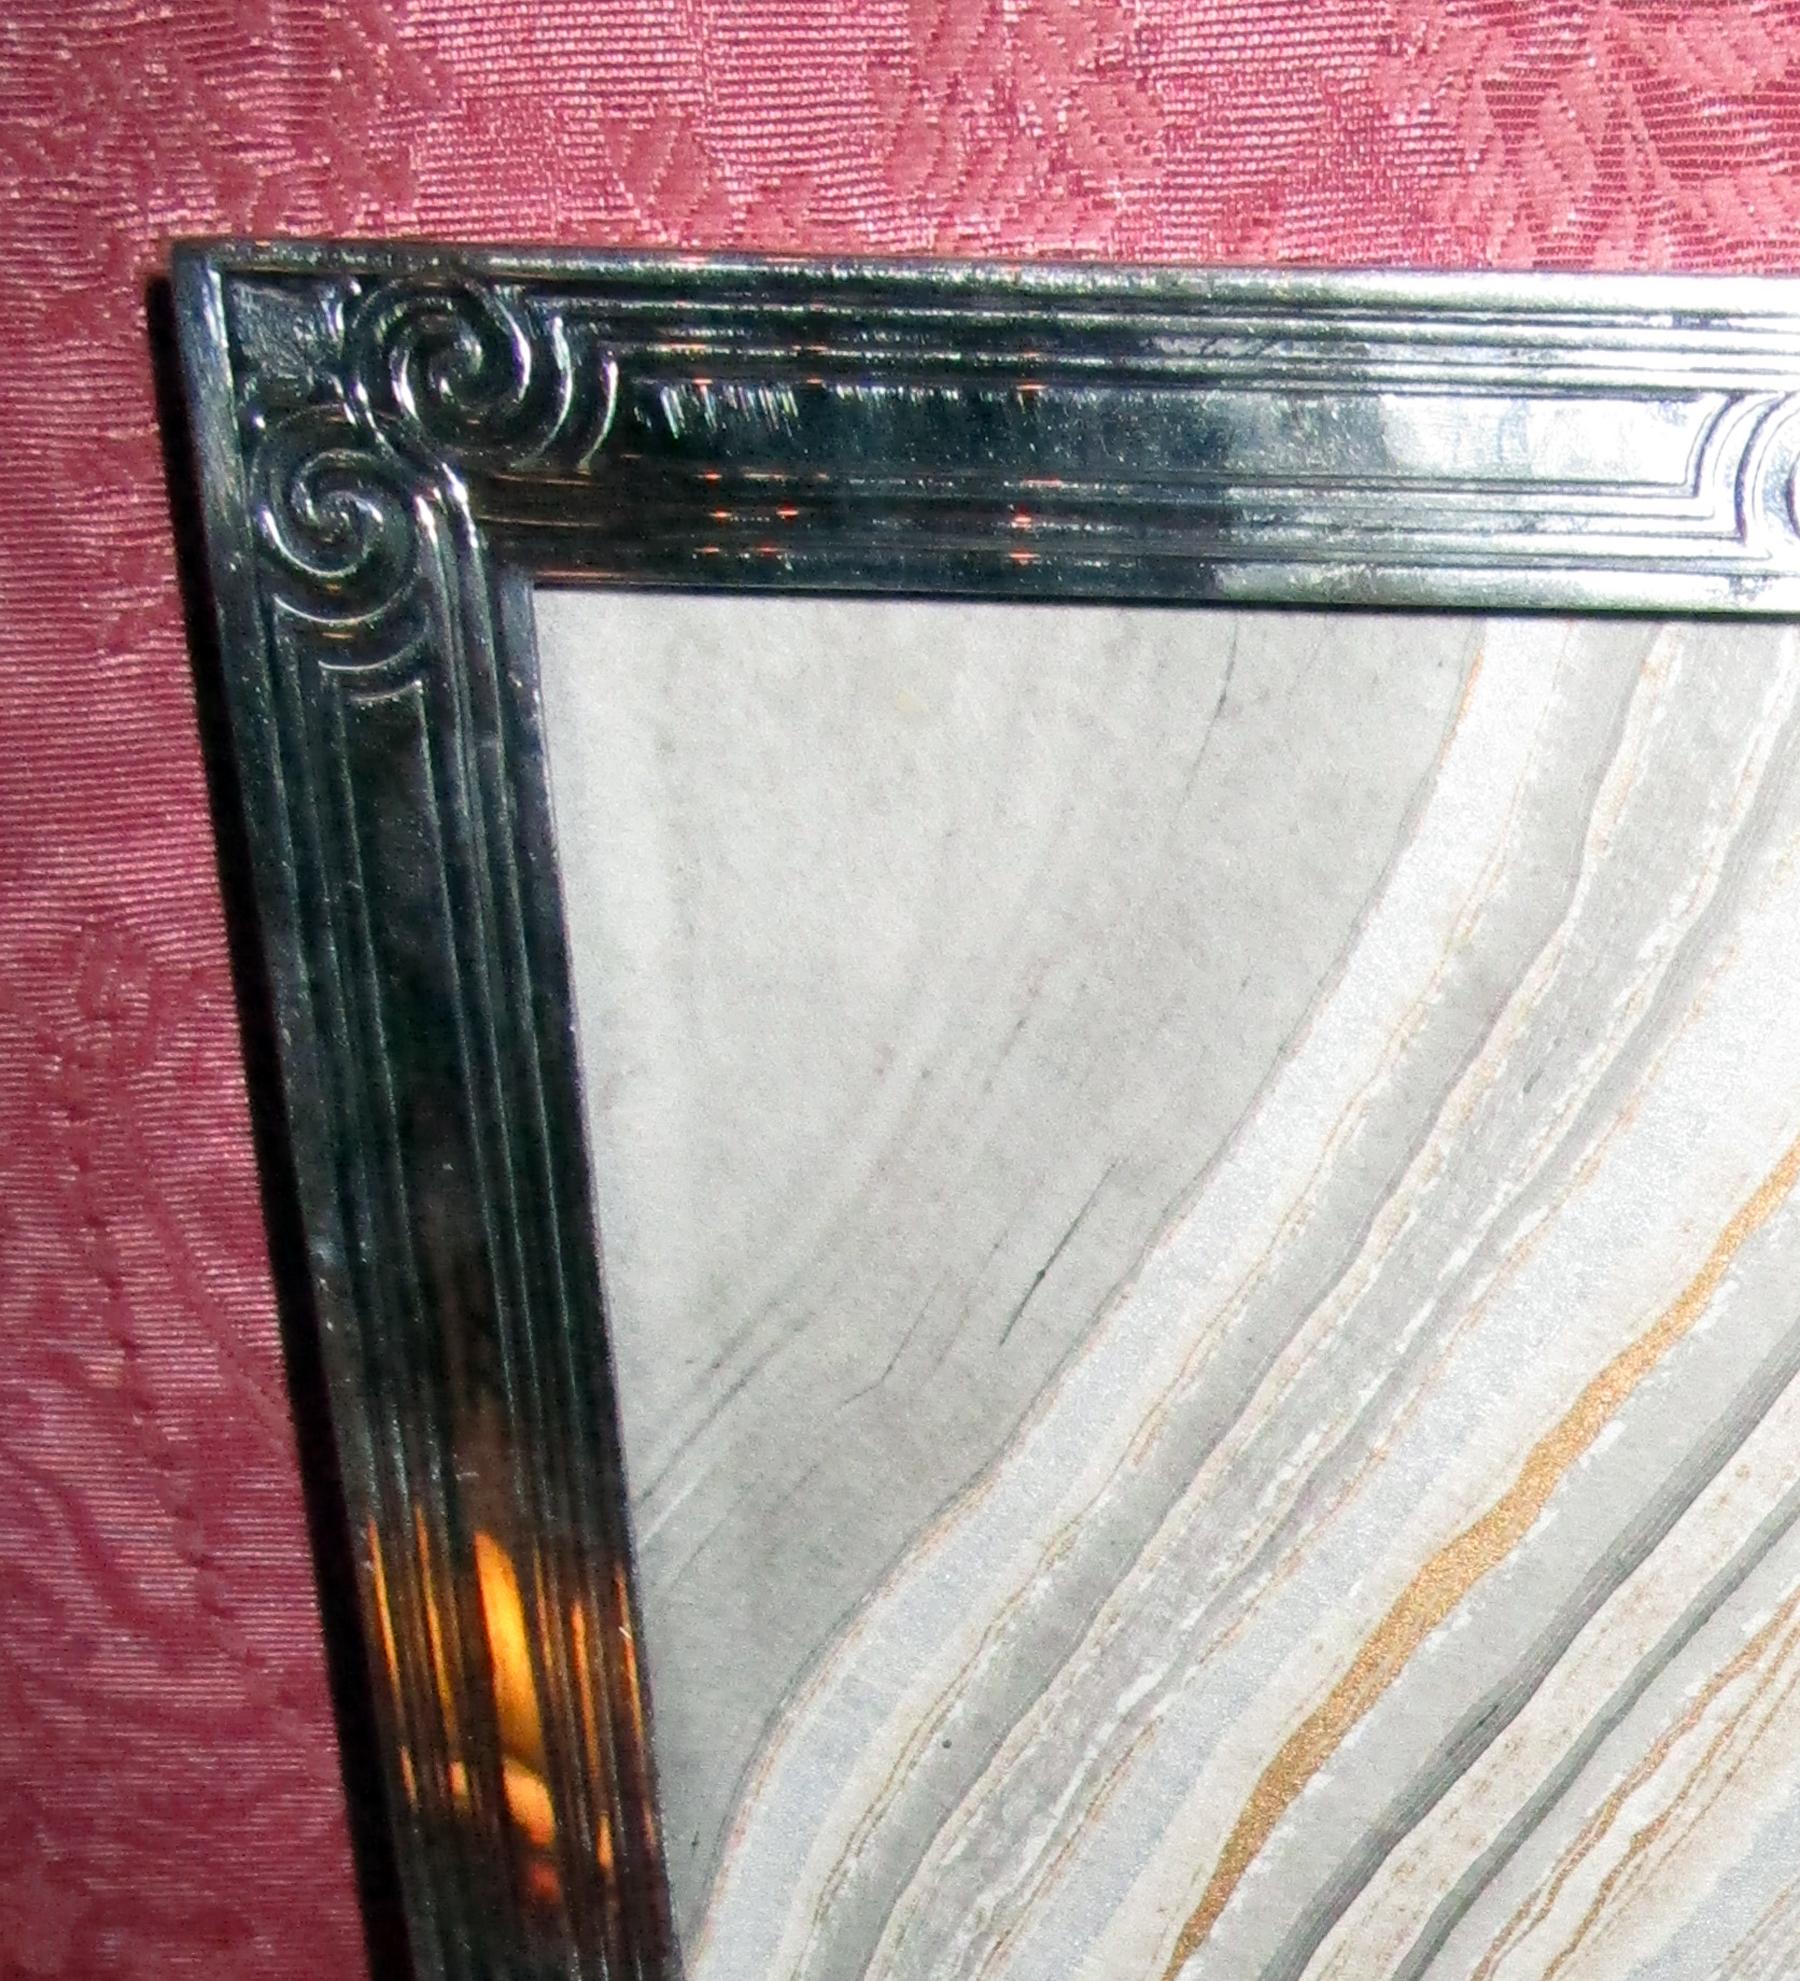 Art Deco sterling silver picture frame signed Tiffany & Co., New York. Rectangular window with acid-etched surround and sides. Marked Tiffany & Co. 16544S (pattern number), Makers 3002, sterling silver 925/1000 M (directors letter 1907-47.) Two